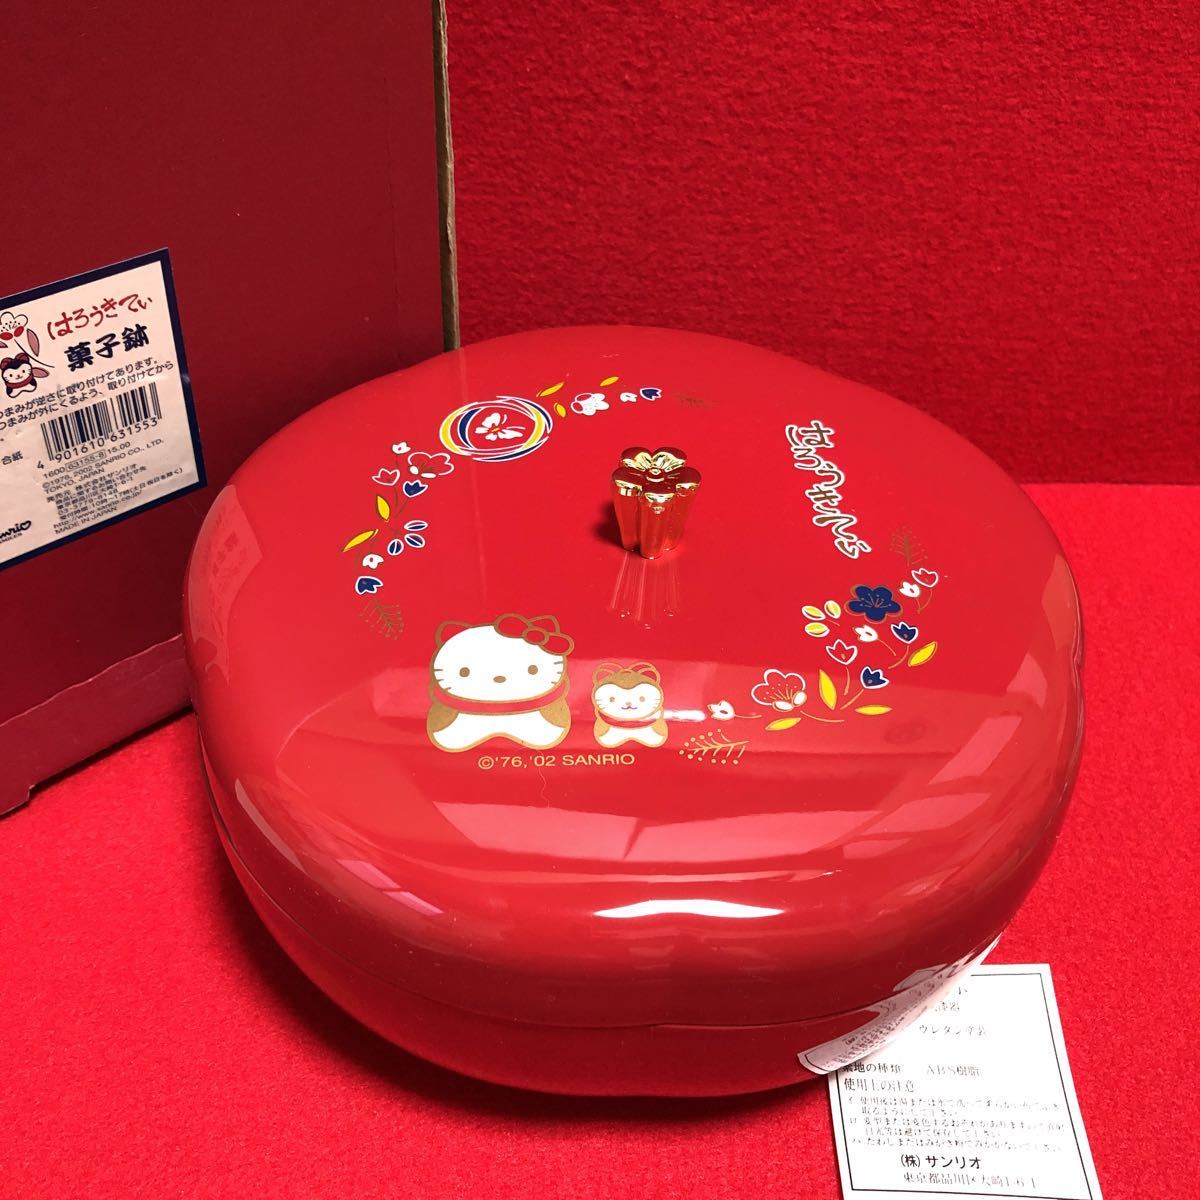  Kitty * Hello Kitty * is . float ..* pastry pot * peace pattern *. dog whirligig dog whirligig ..*2002 year * lacquer ware * Sanrio * unused storage goods * ultra rare *